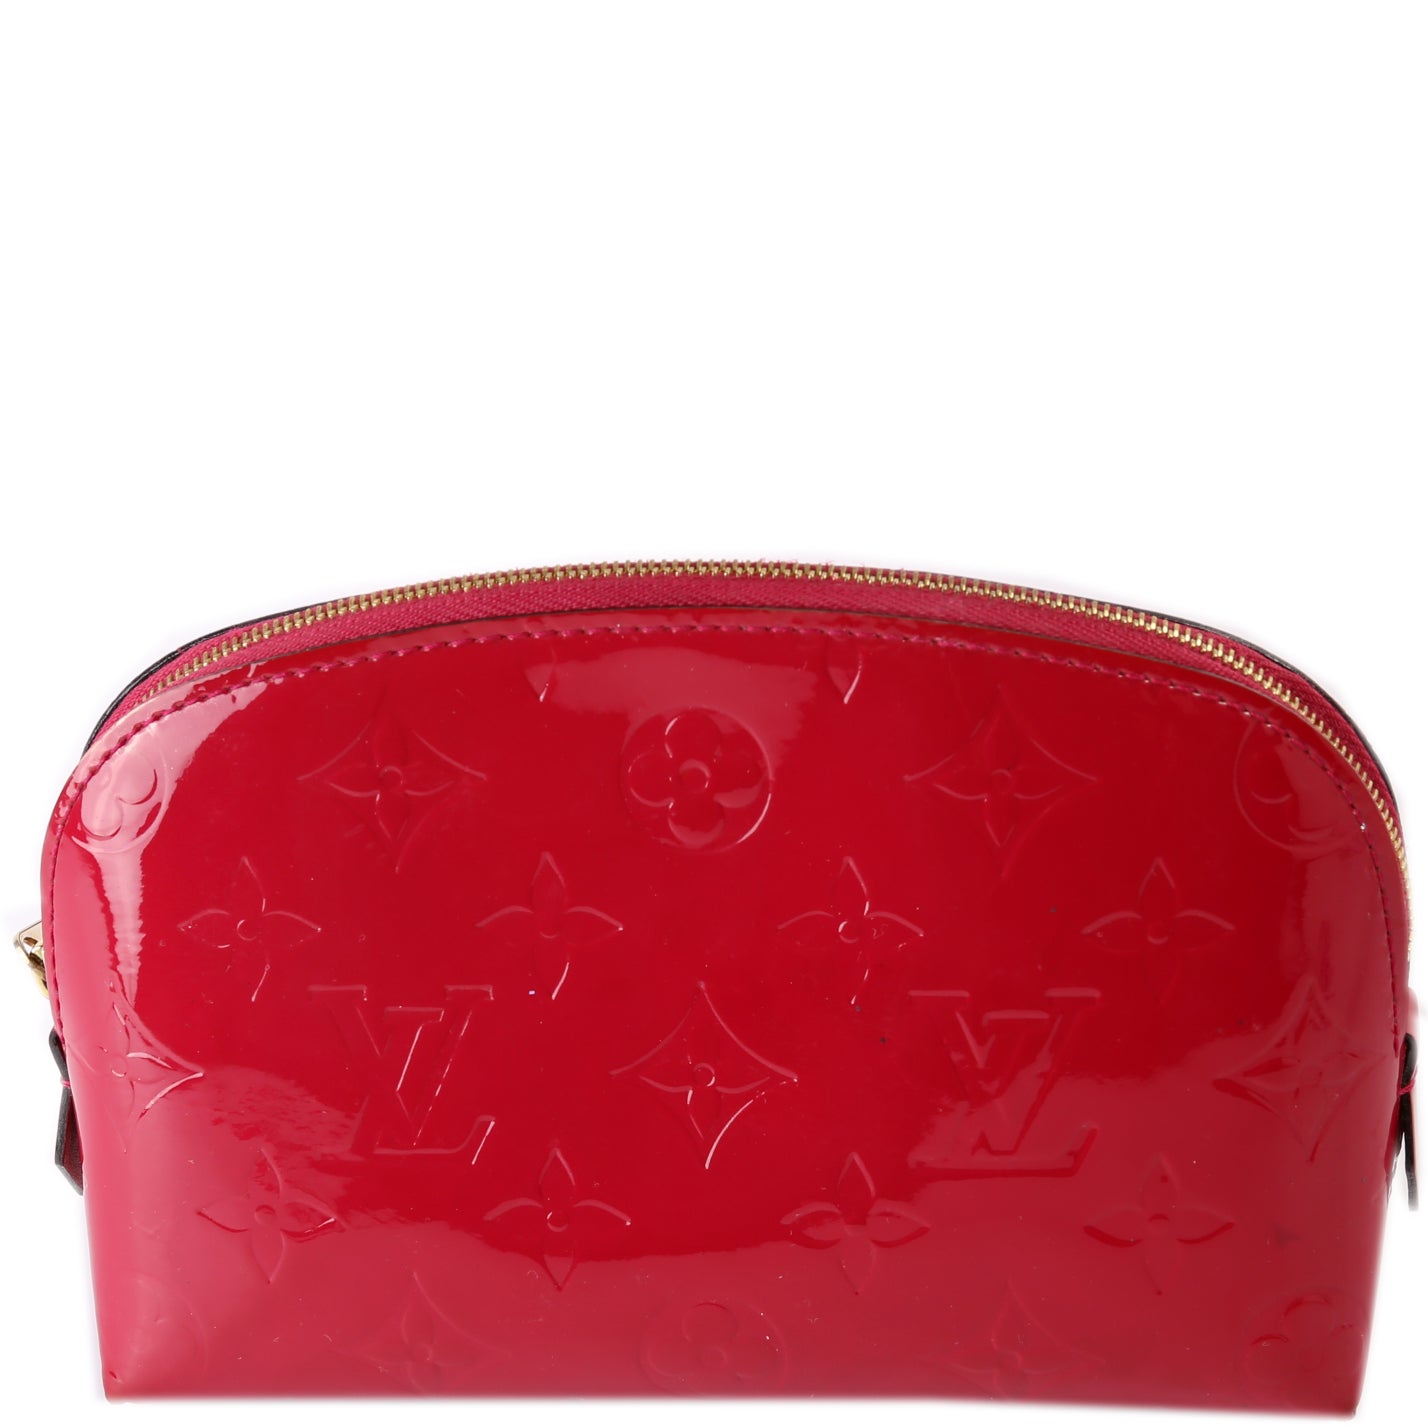 Louis Vuitton Empreinte Cosmetic Pouch - Red Cosmetic Bags